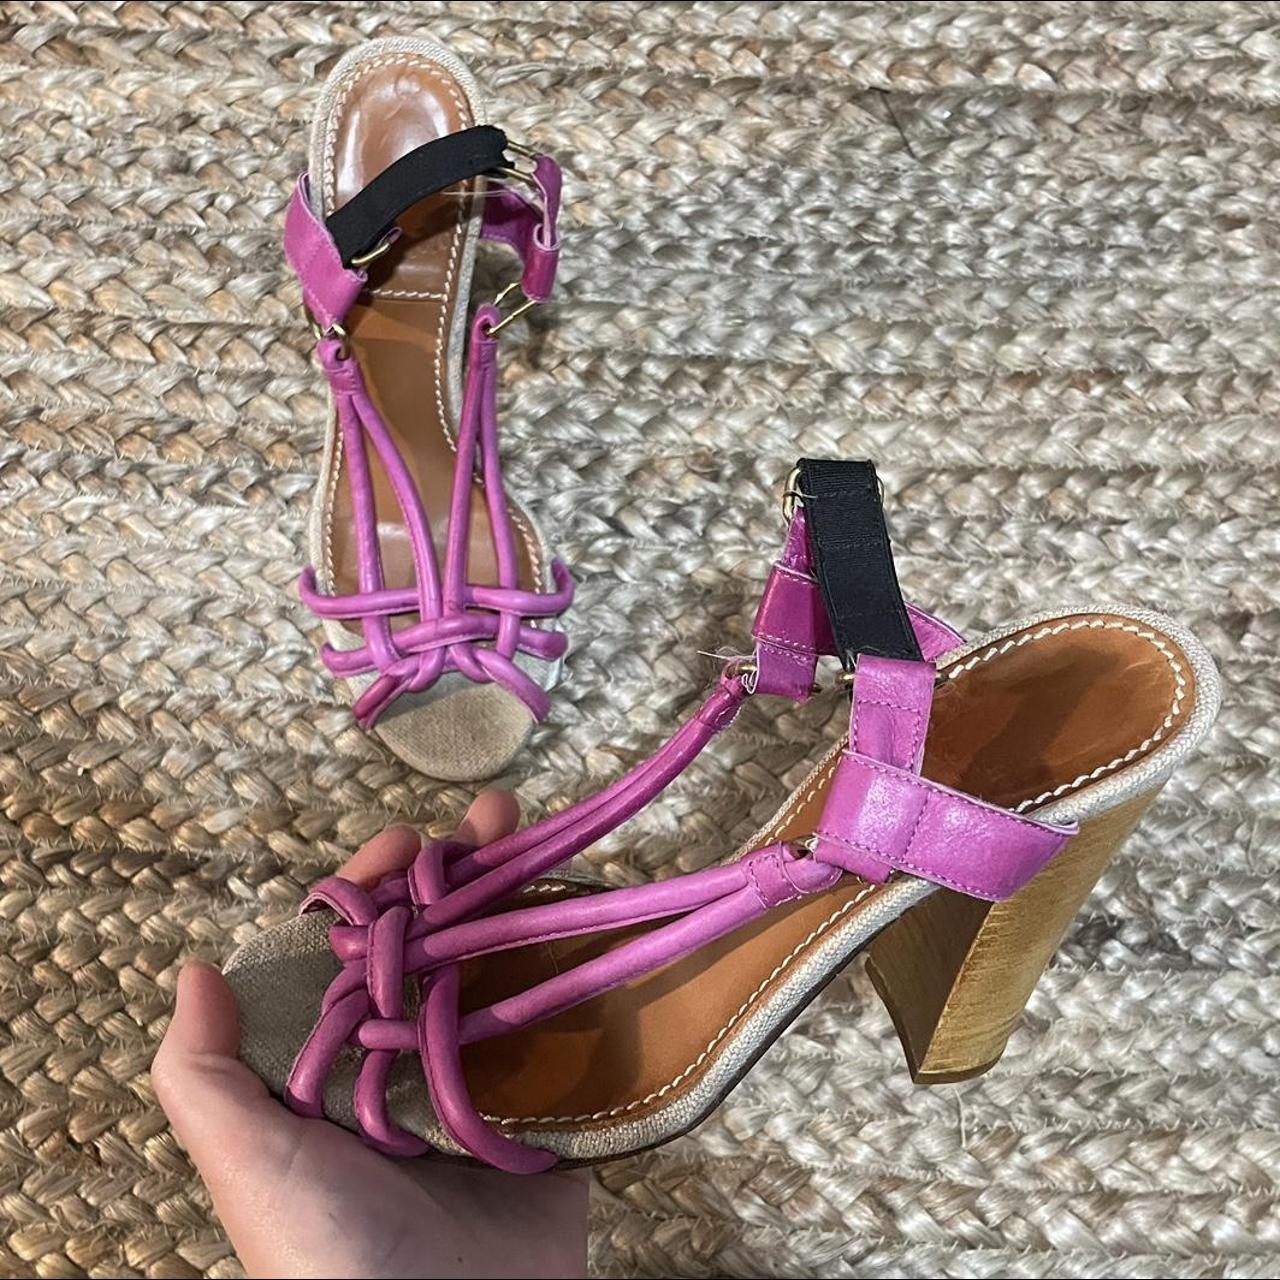 Lanvin Women's Pink and Tan Sandals (3)